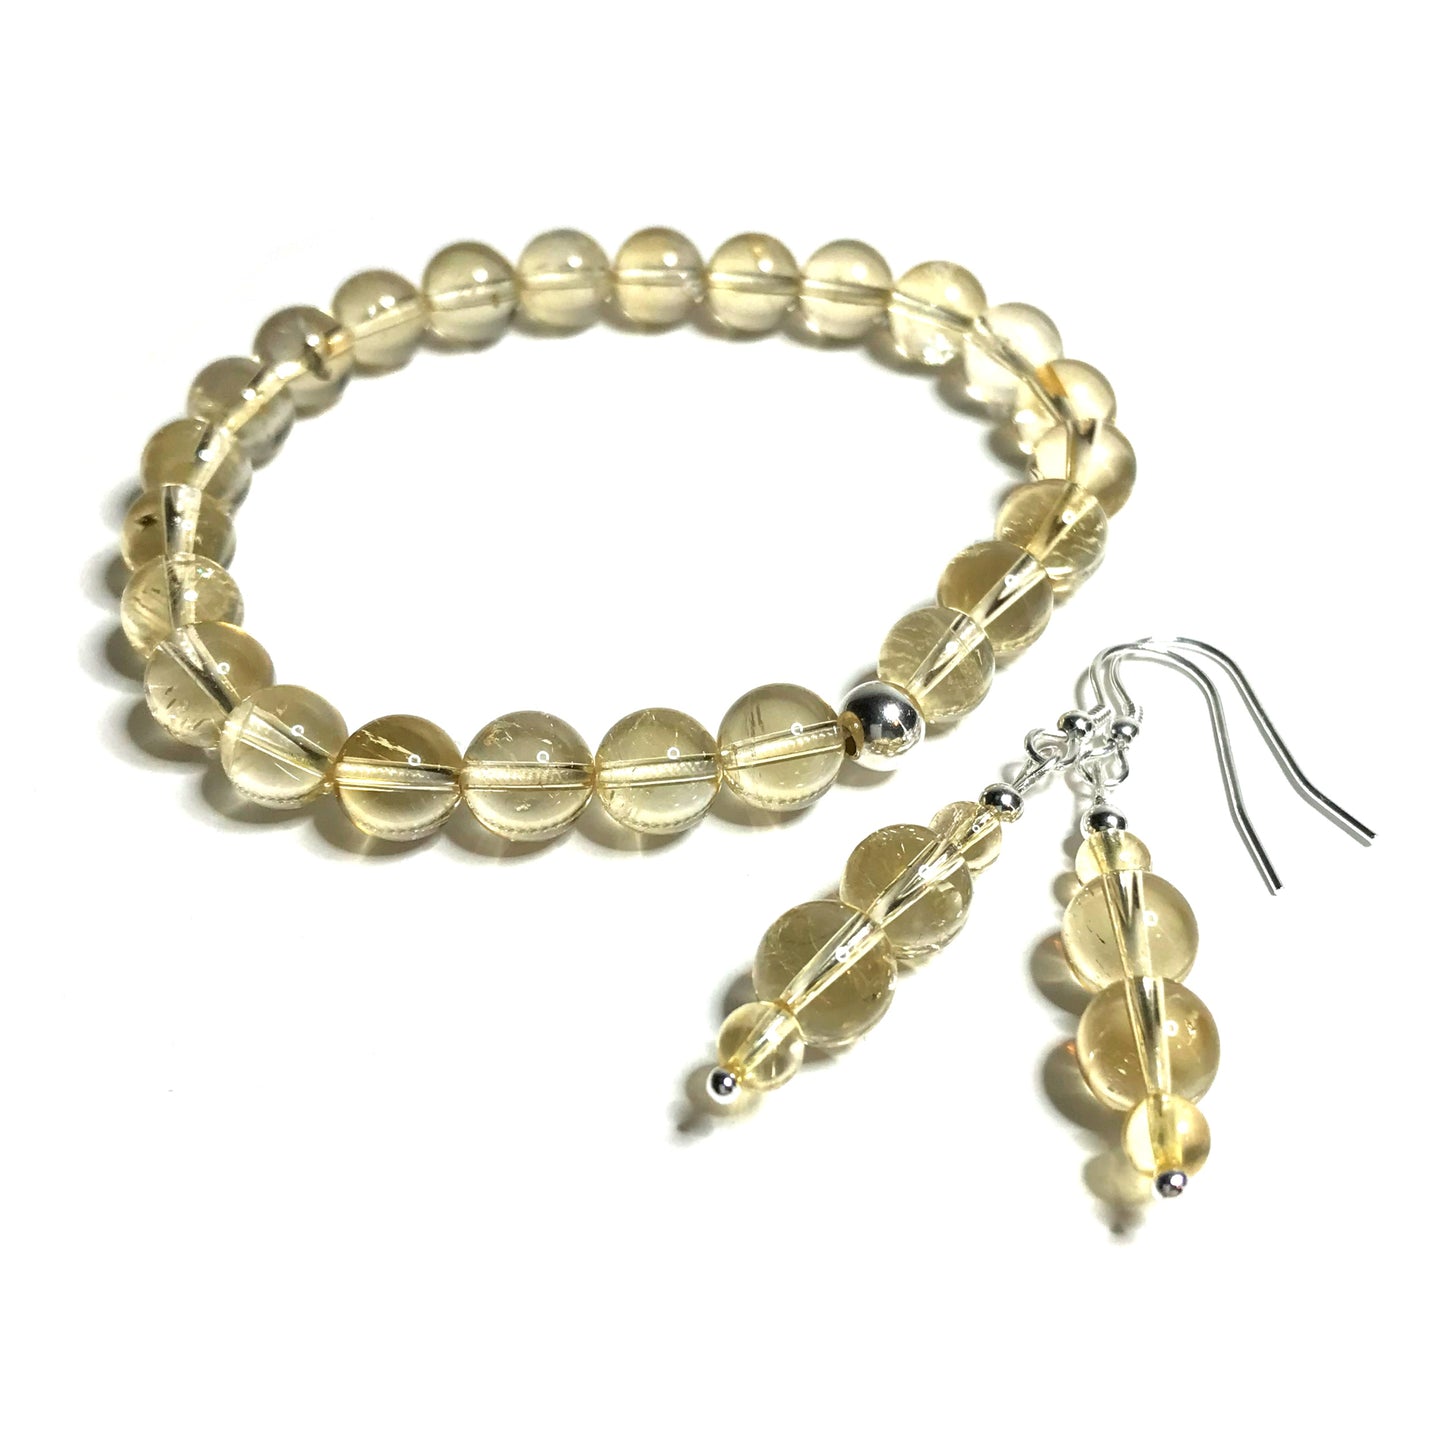 Citrine beaded bracelet and matching drop earrings